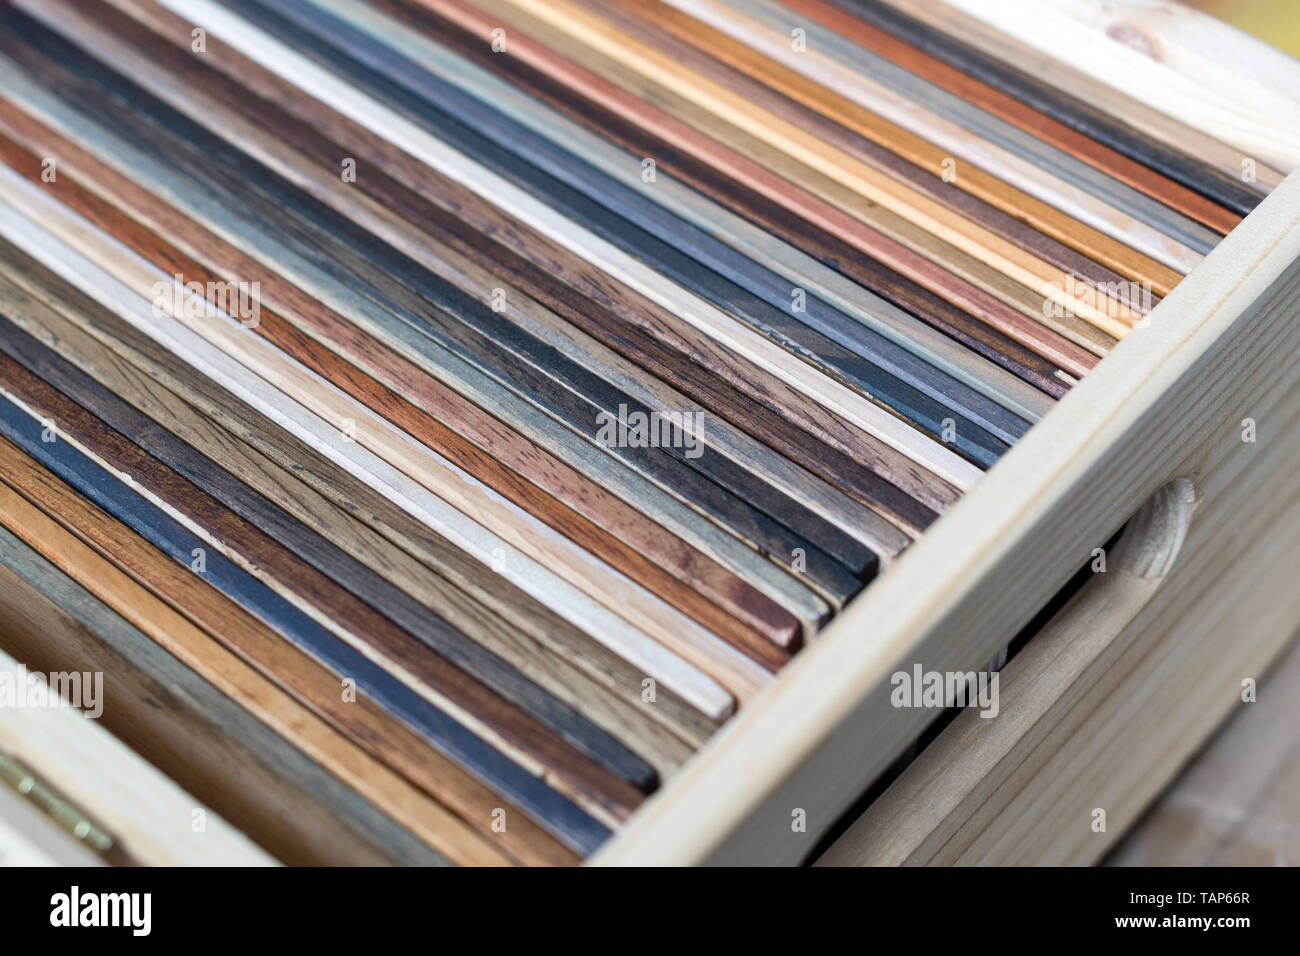 Samples of different kinds of wood in a box Stock Photo